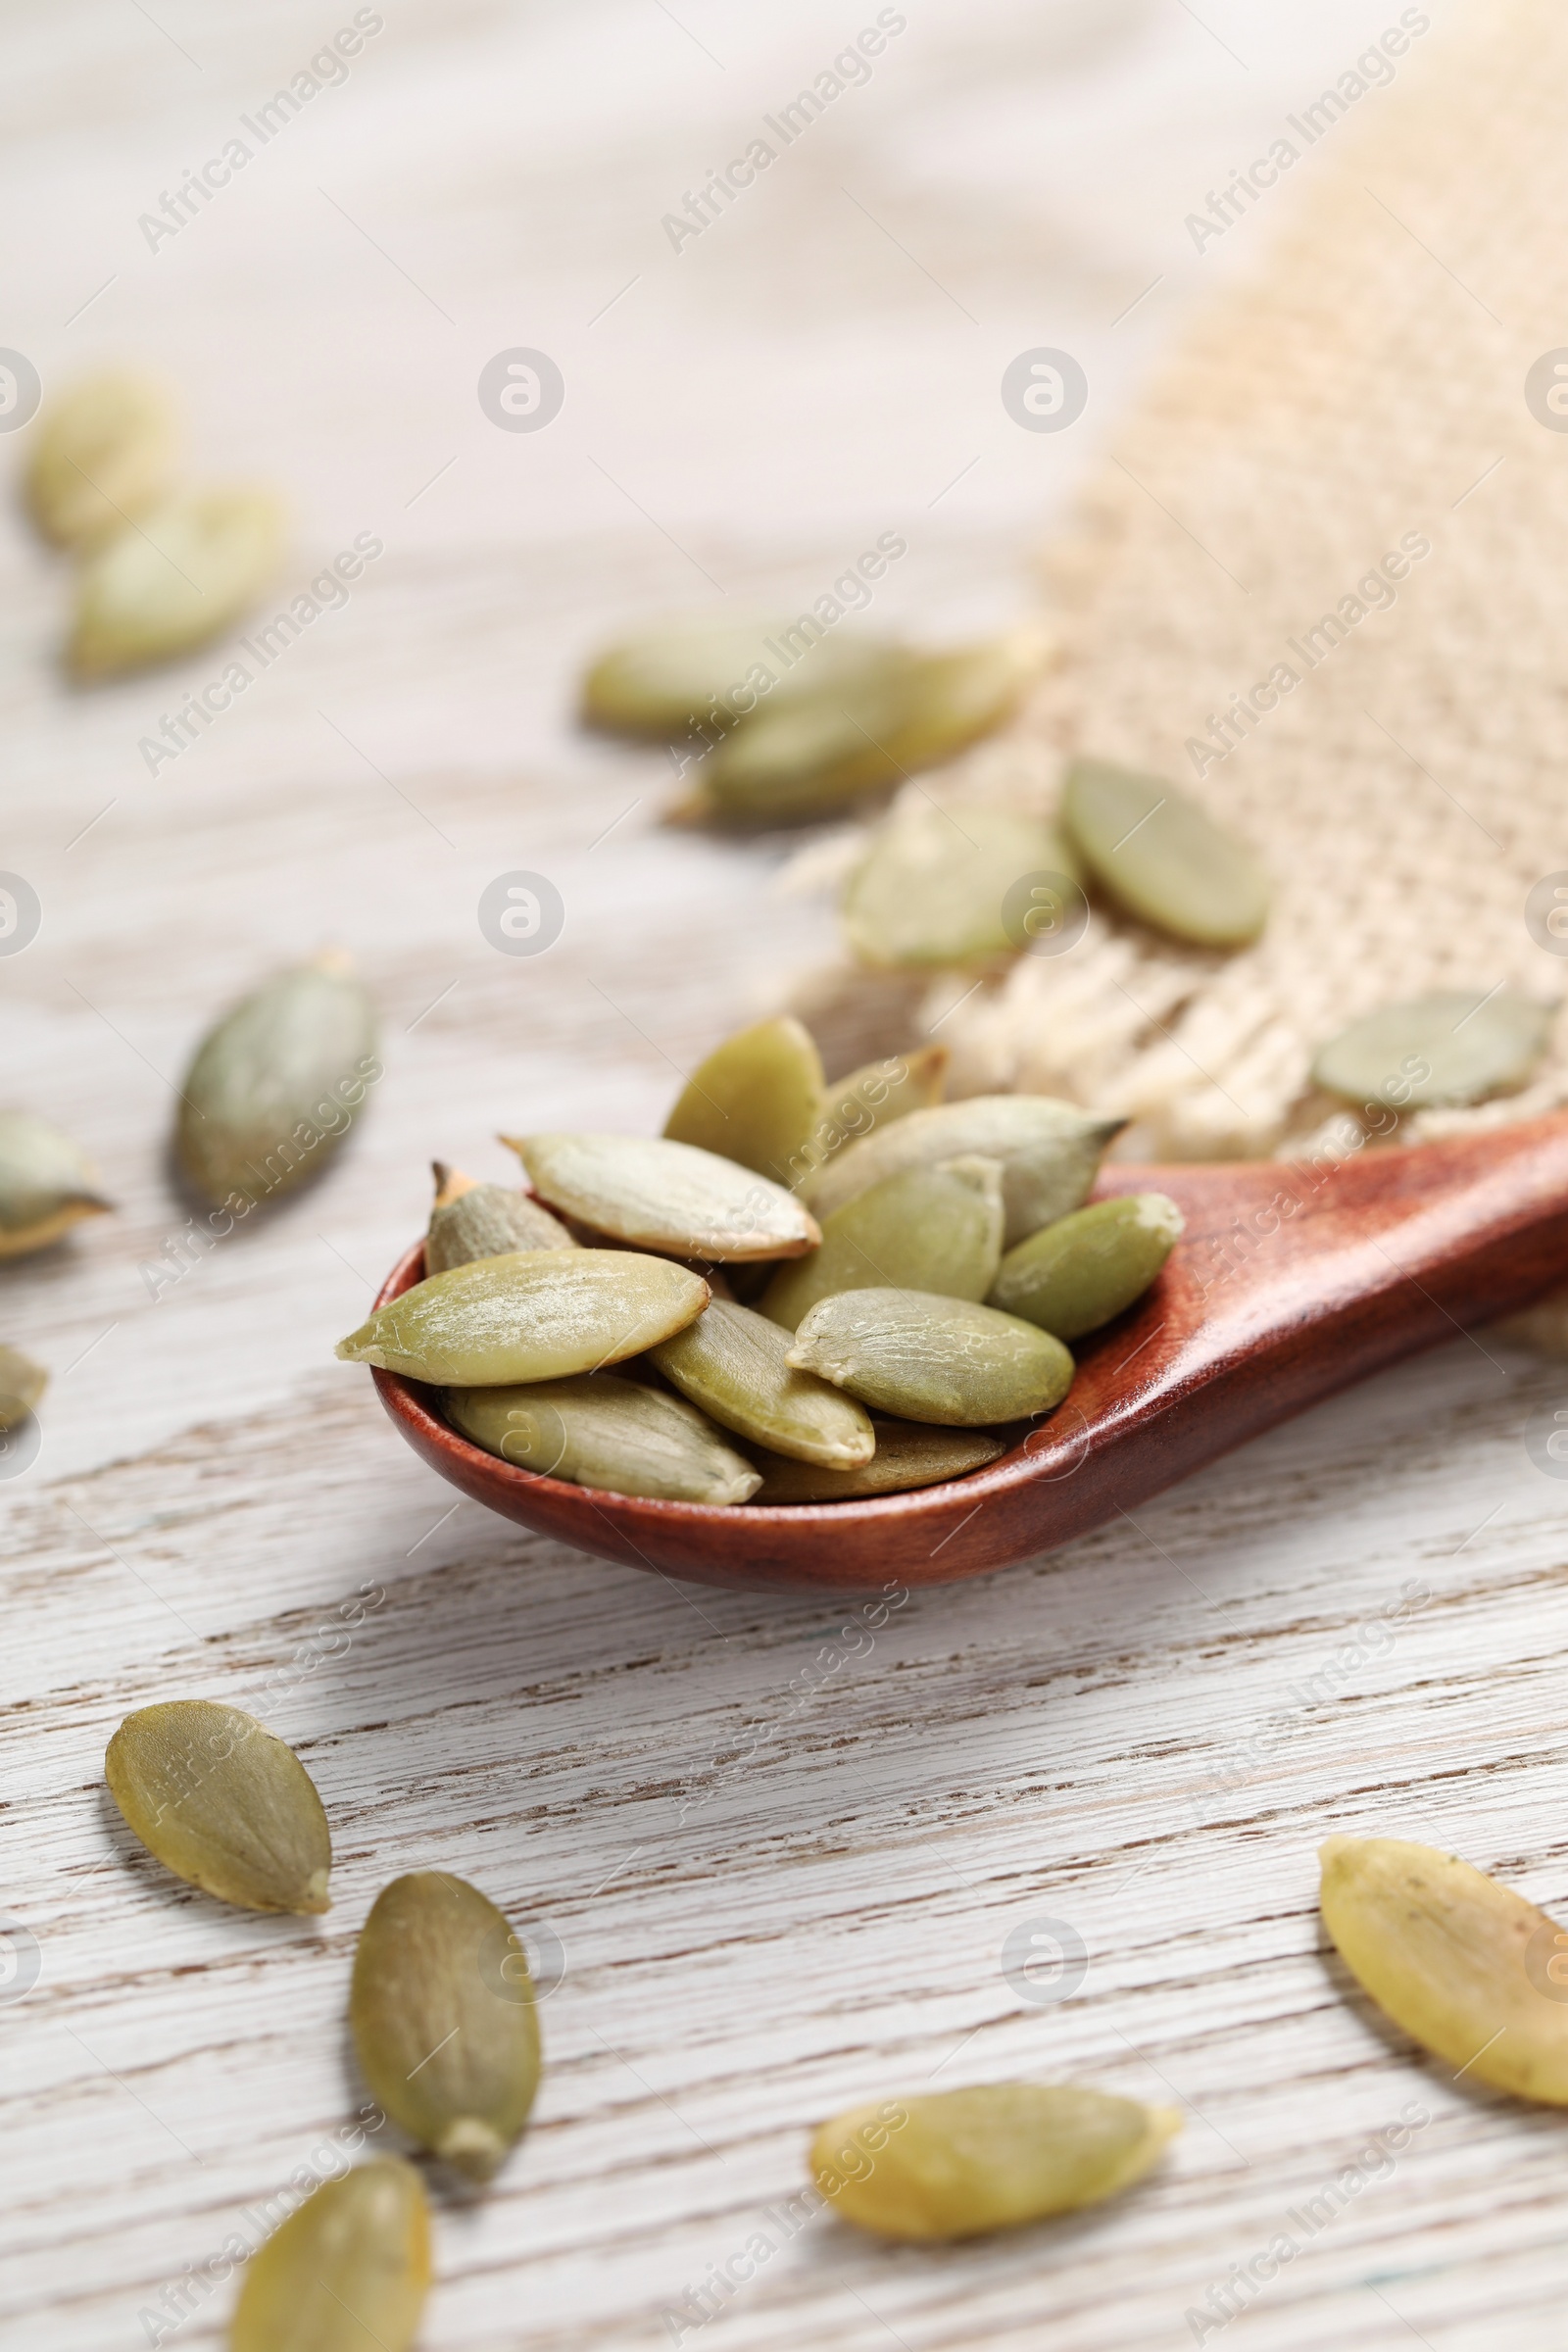 Photo of Spoon with peeled seeds on light wooden table